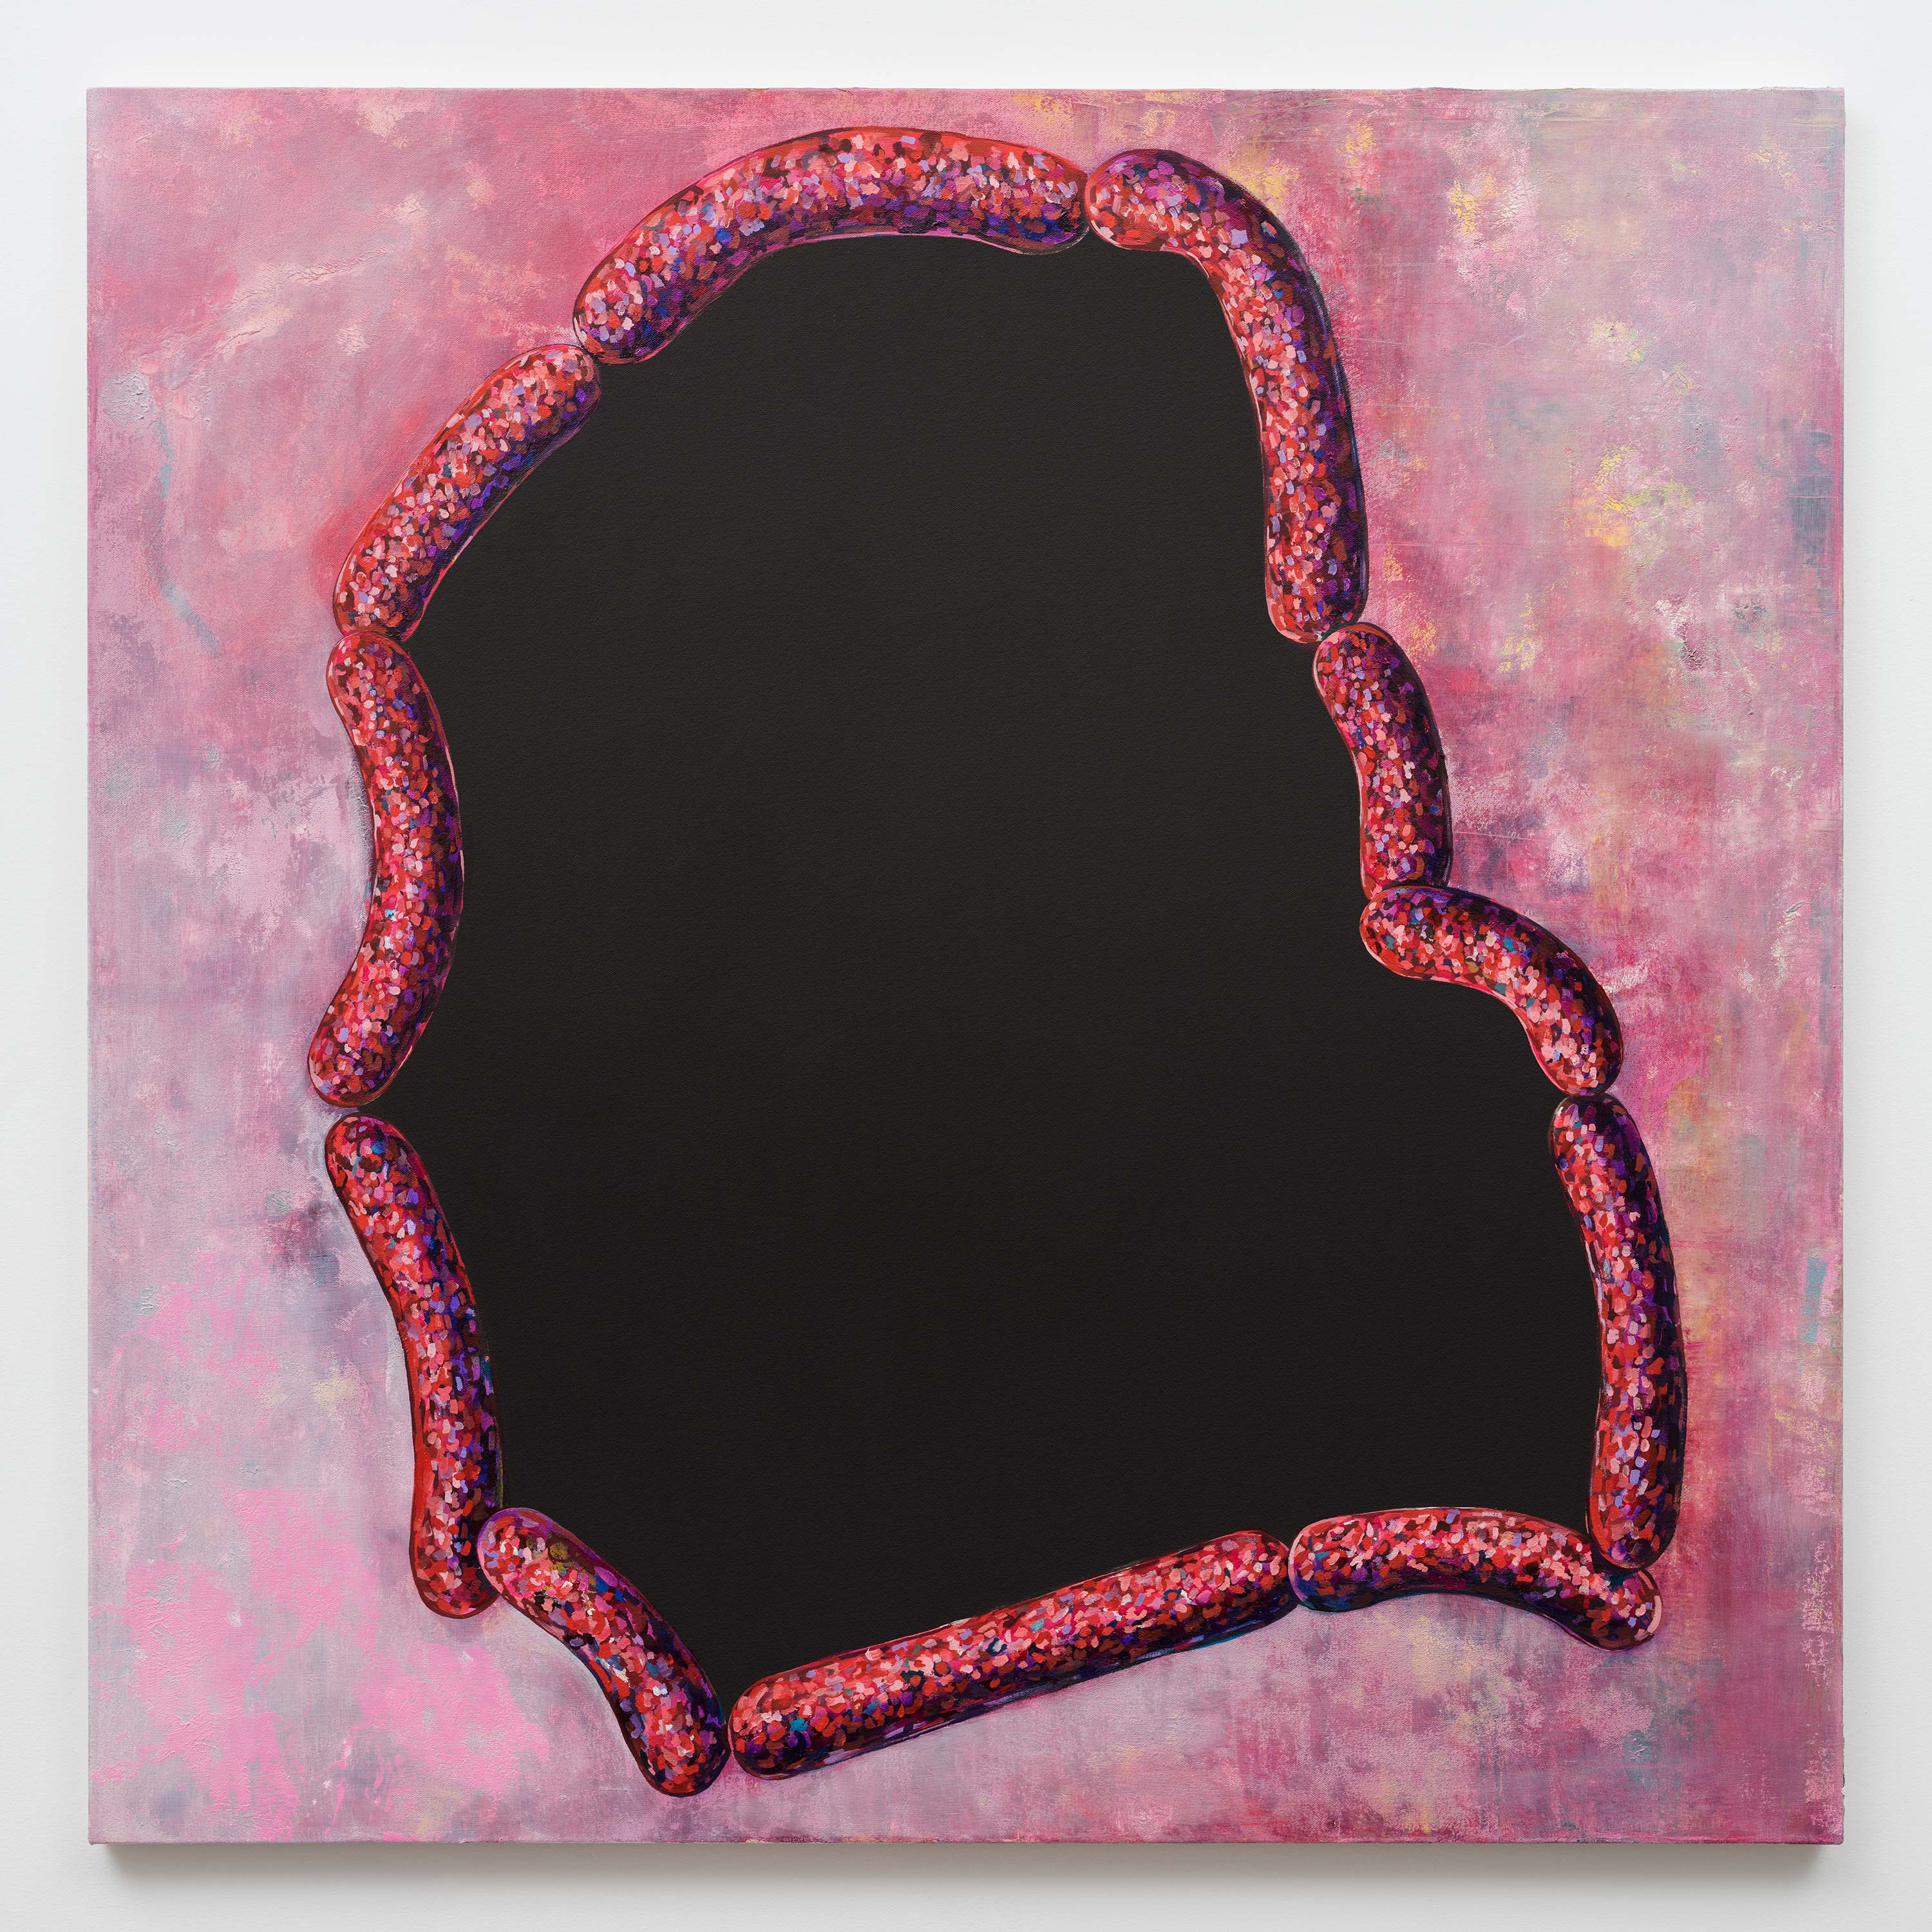 Paul Branca<br>Untitled, Hole<br>2015<br>Oil on canvas<br>40 x 40 inches (101.6 x 101.6 cm)